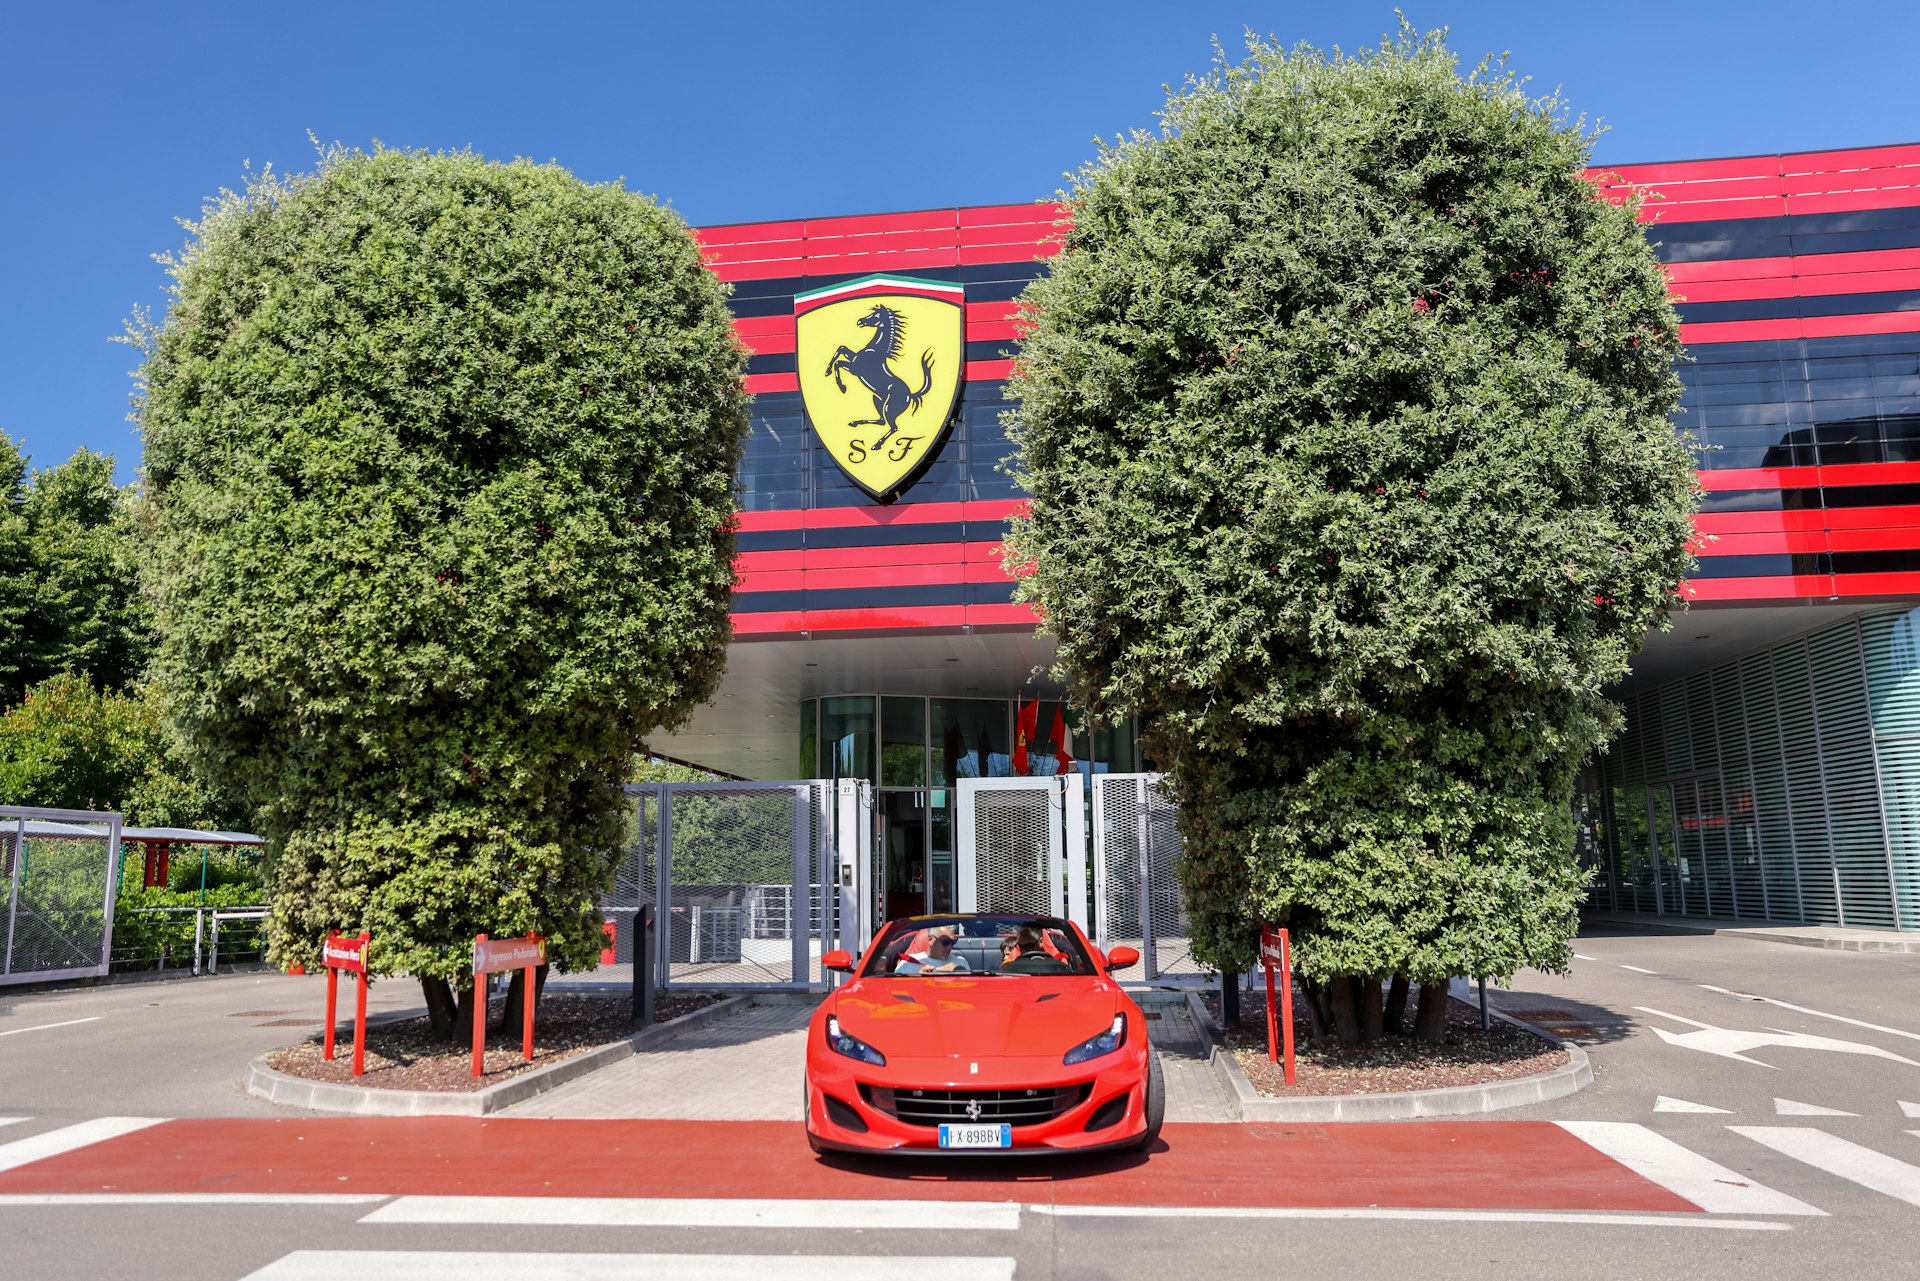 Vehicles and exteriors of the Ferrari Museum in Italy